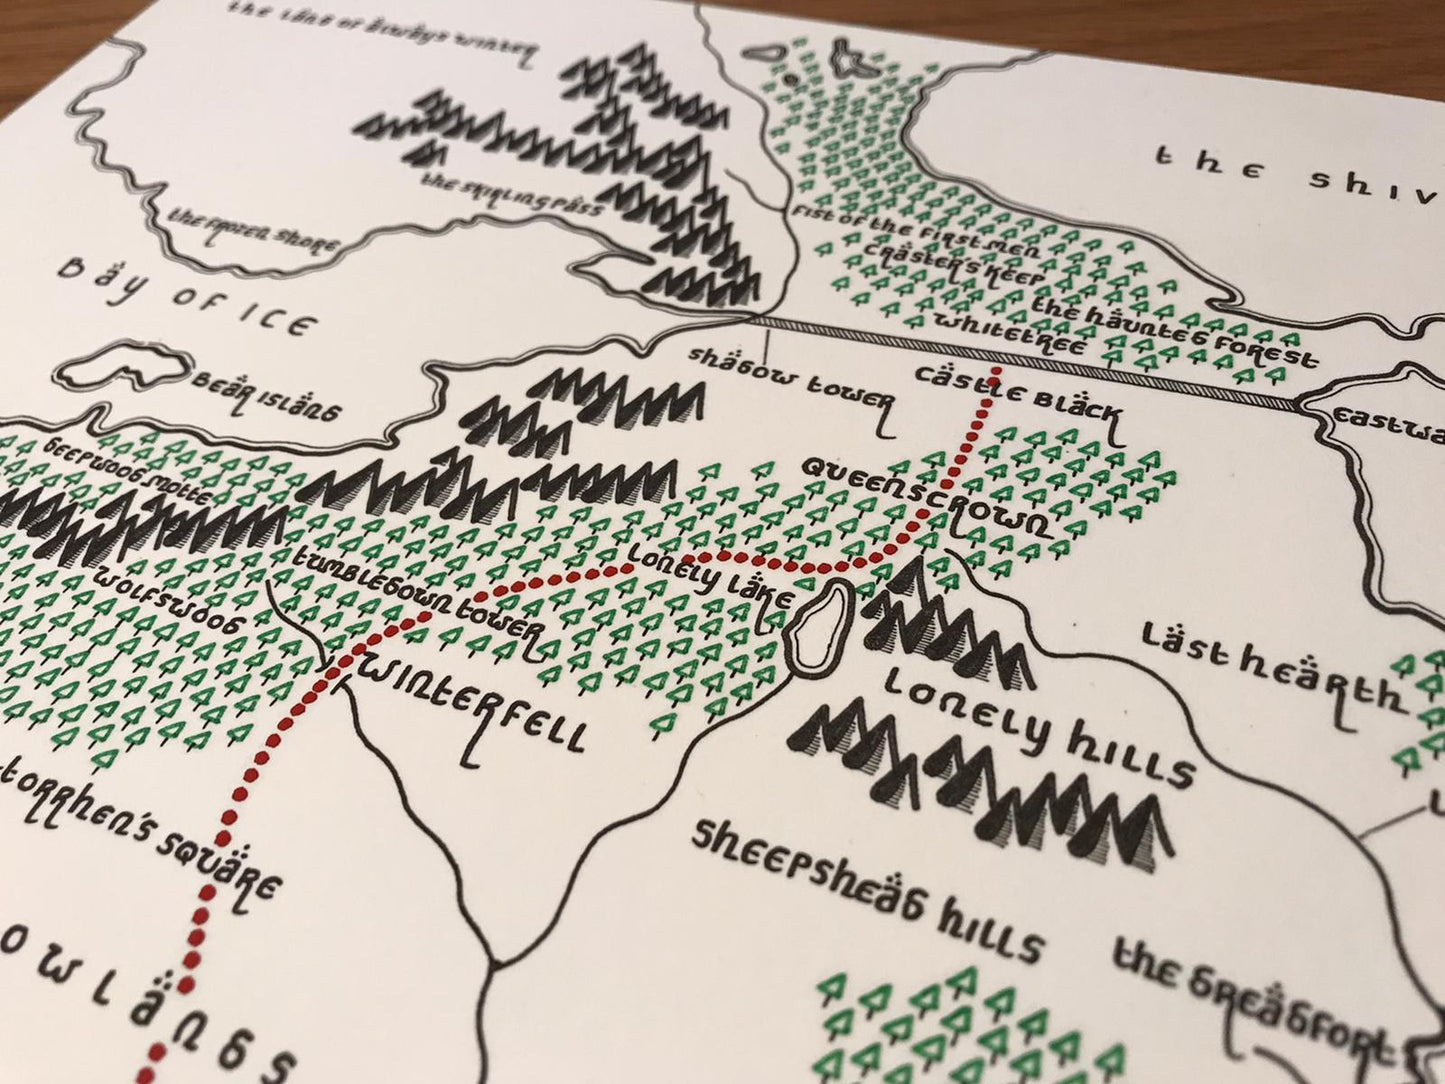 Westeros Map (Tolkien Style)